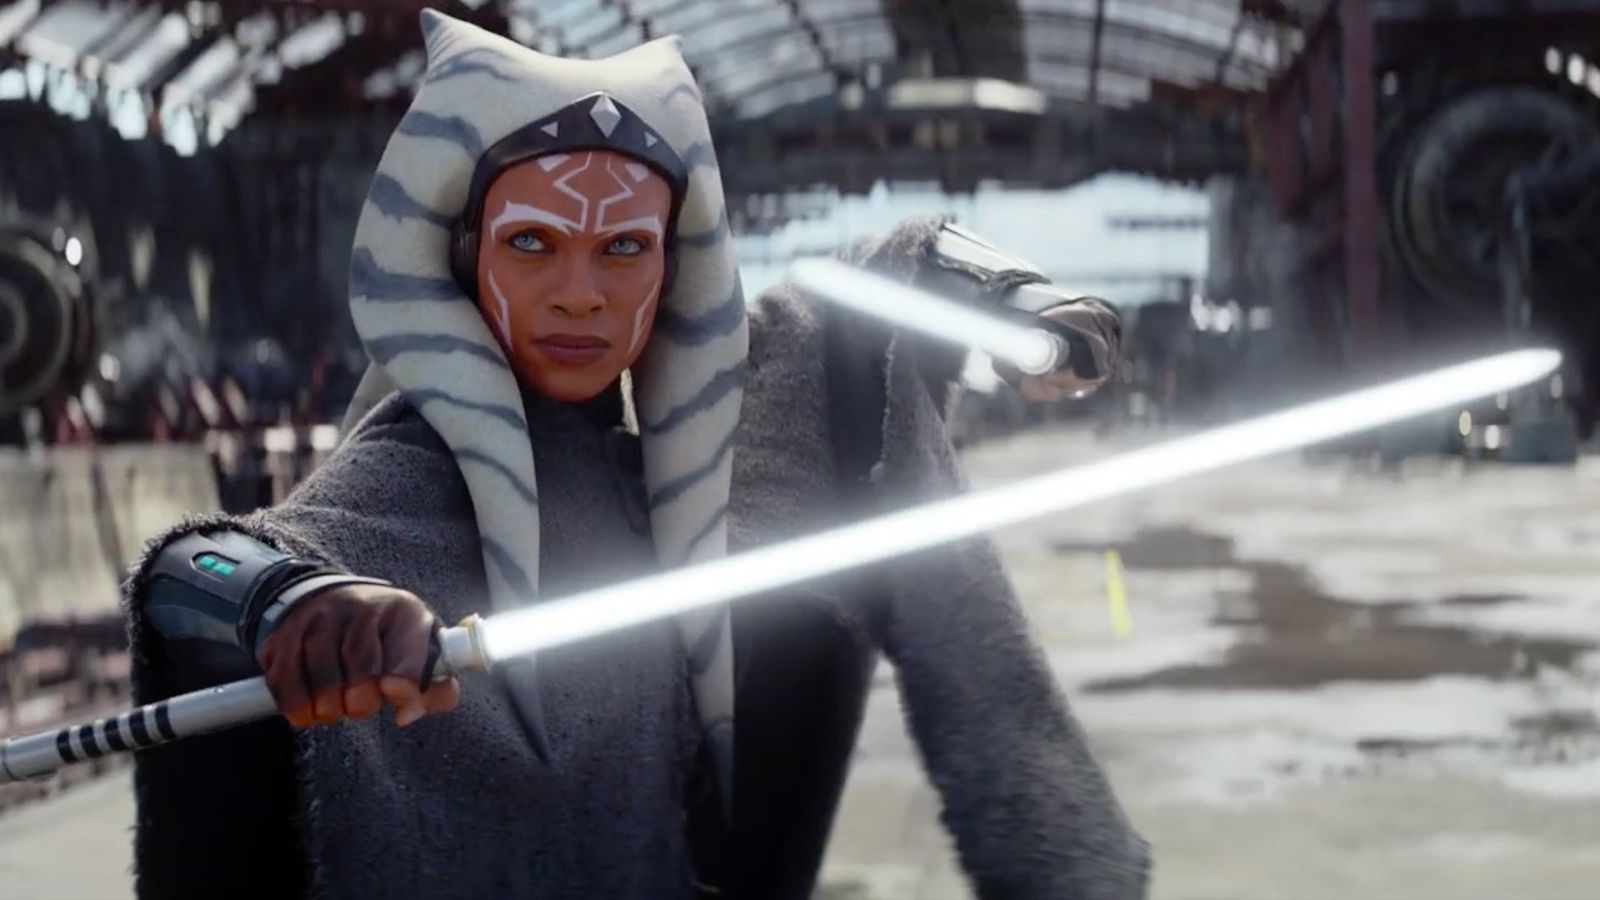 Ahsoka is yet more proof that Star Wars has a Jedi problem.